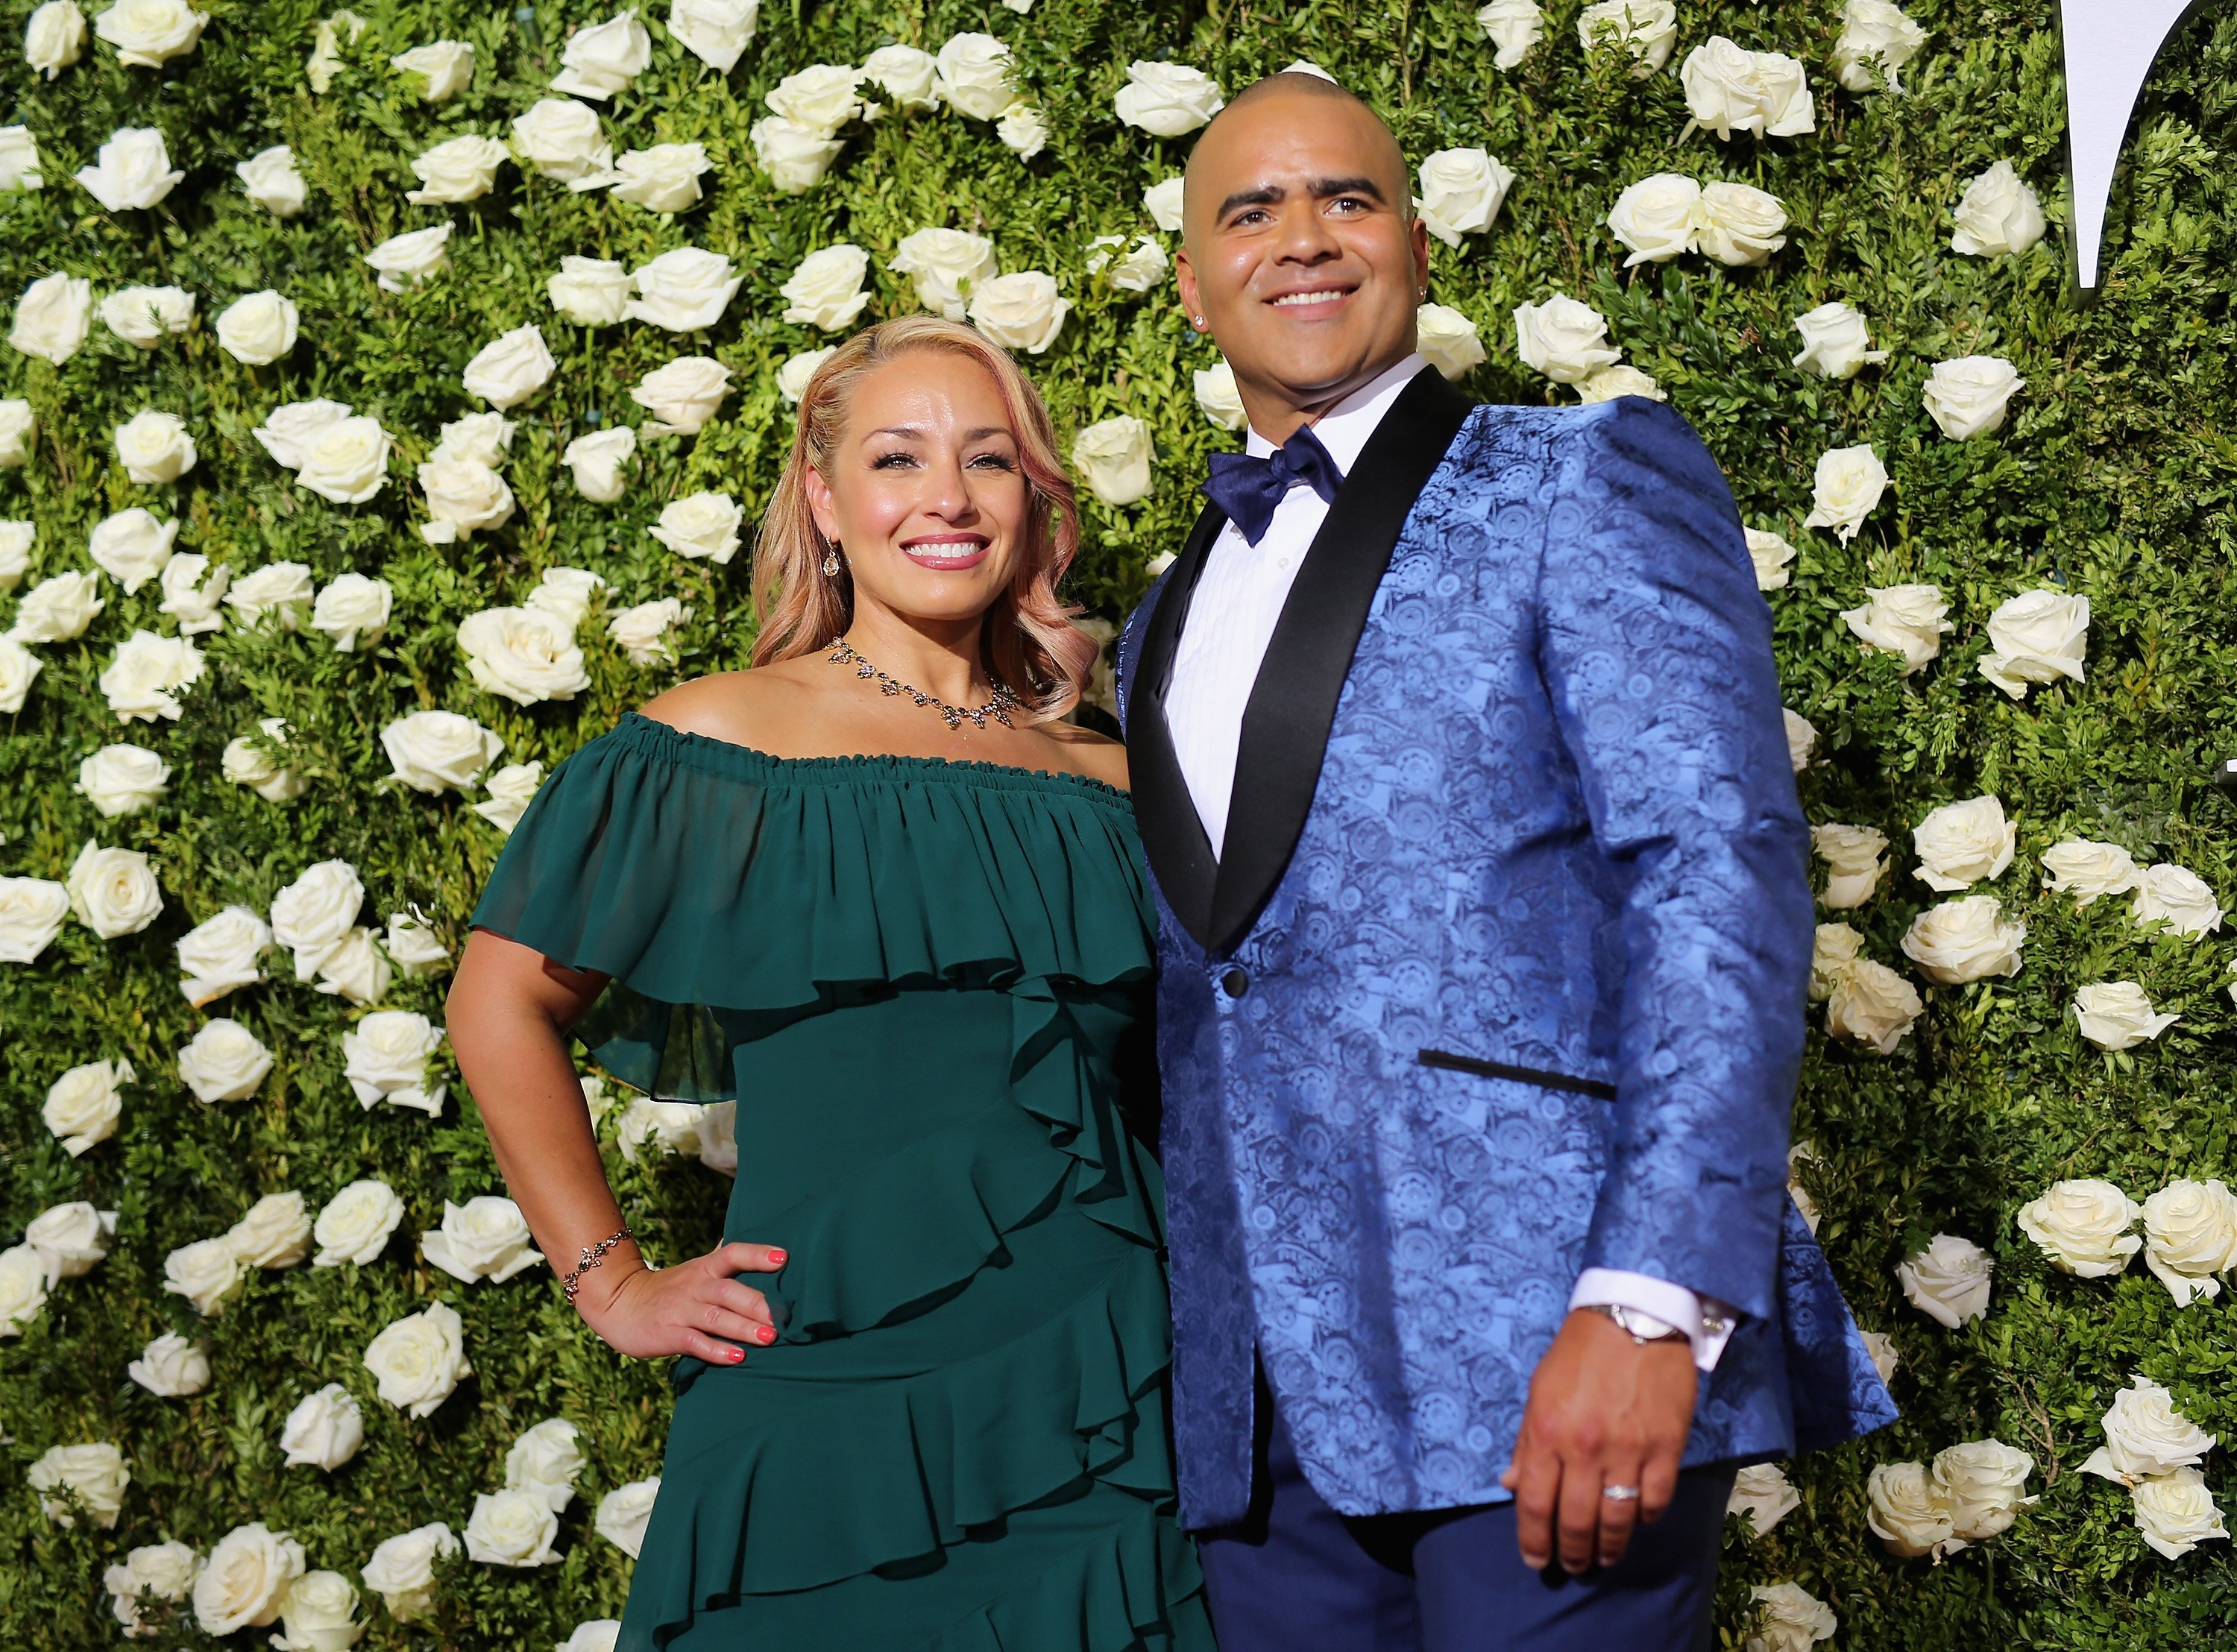 Veronica Jackson and Christopher Jackson attend the 2017 Tony Awards at Radio City Music Hall on June 11, 2017, in New York City. | Source: Getty Images.